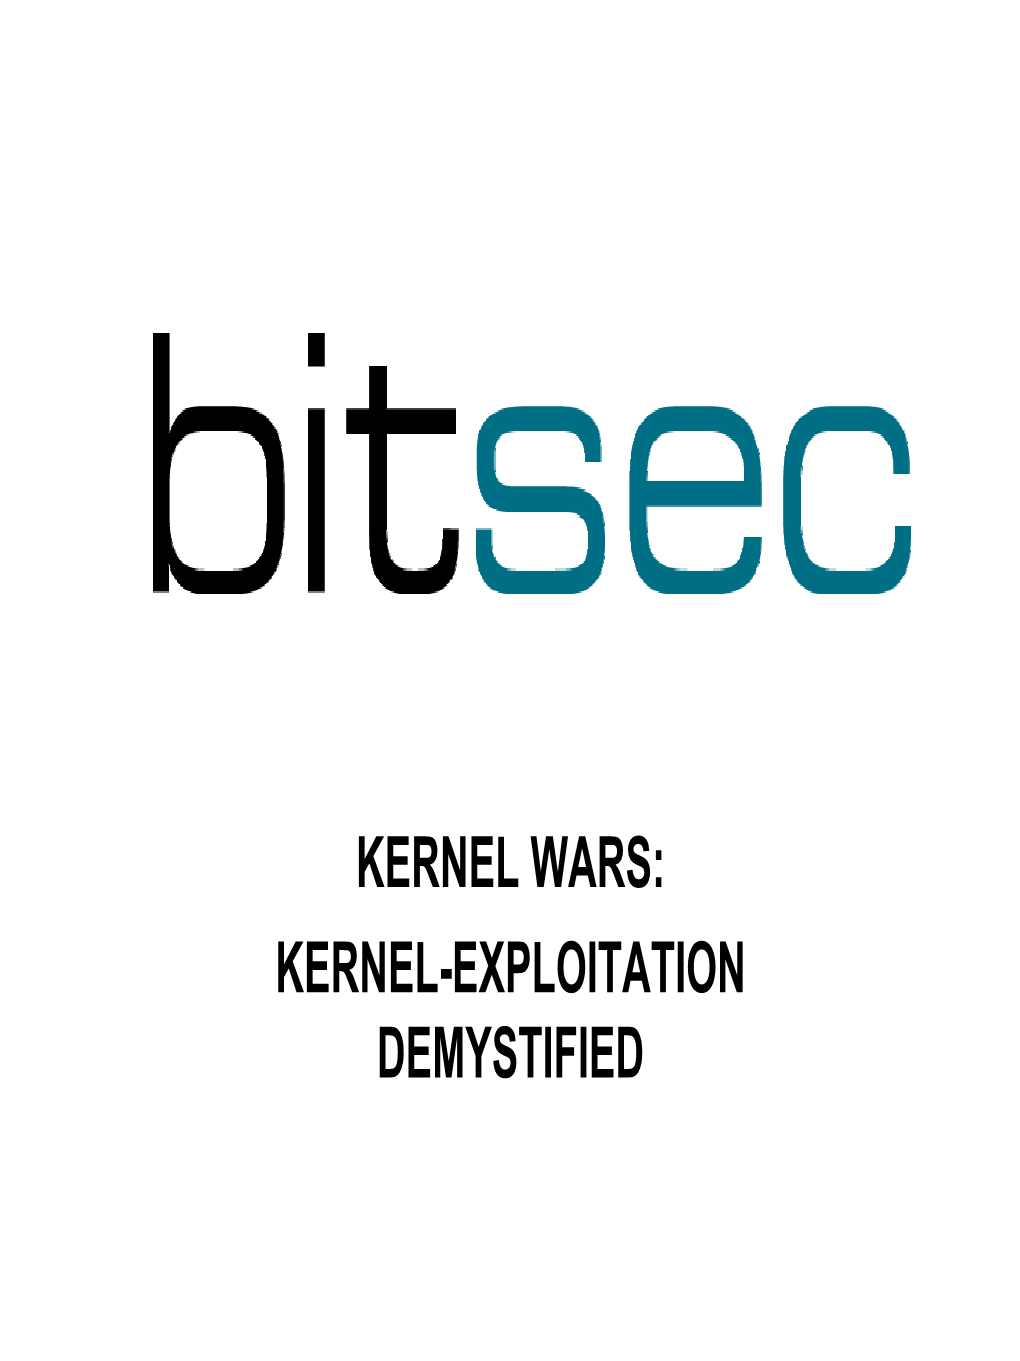 KERNEL-EXPLOITATION DEMYSTIFIED Introduction to Kernel-Mode Vulnerabilities and Exploitation